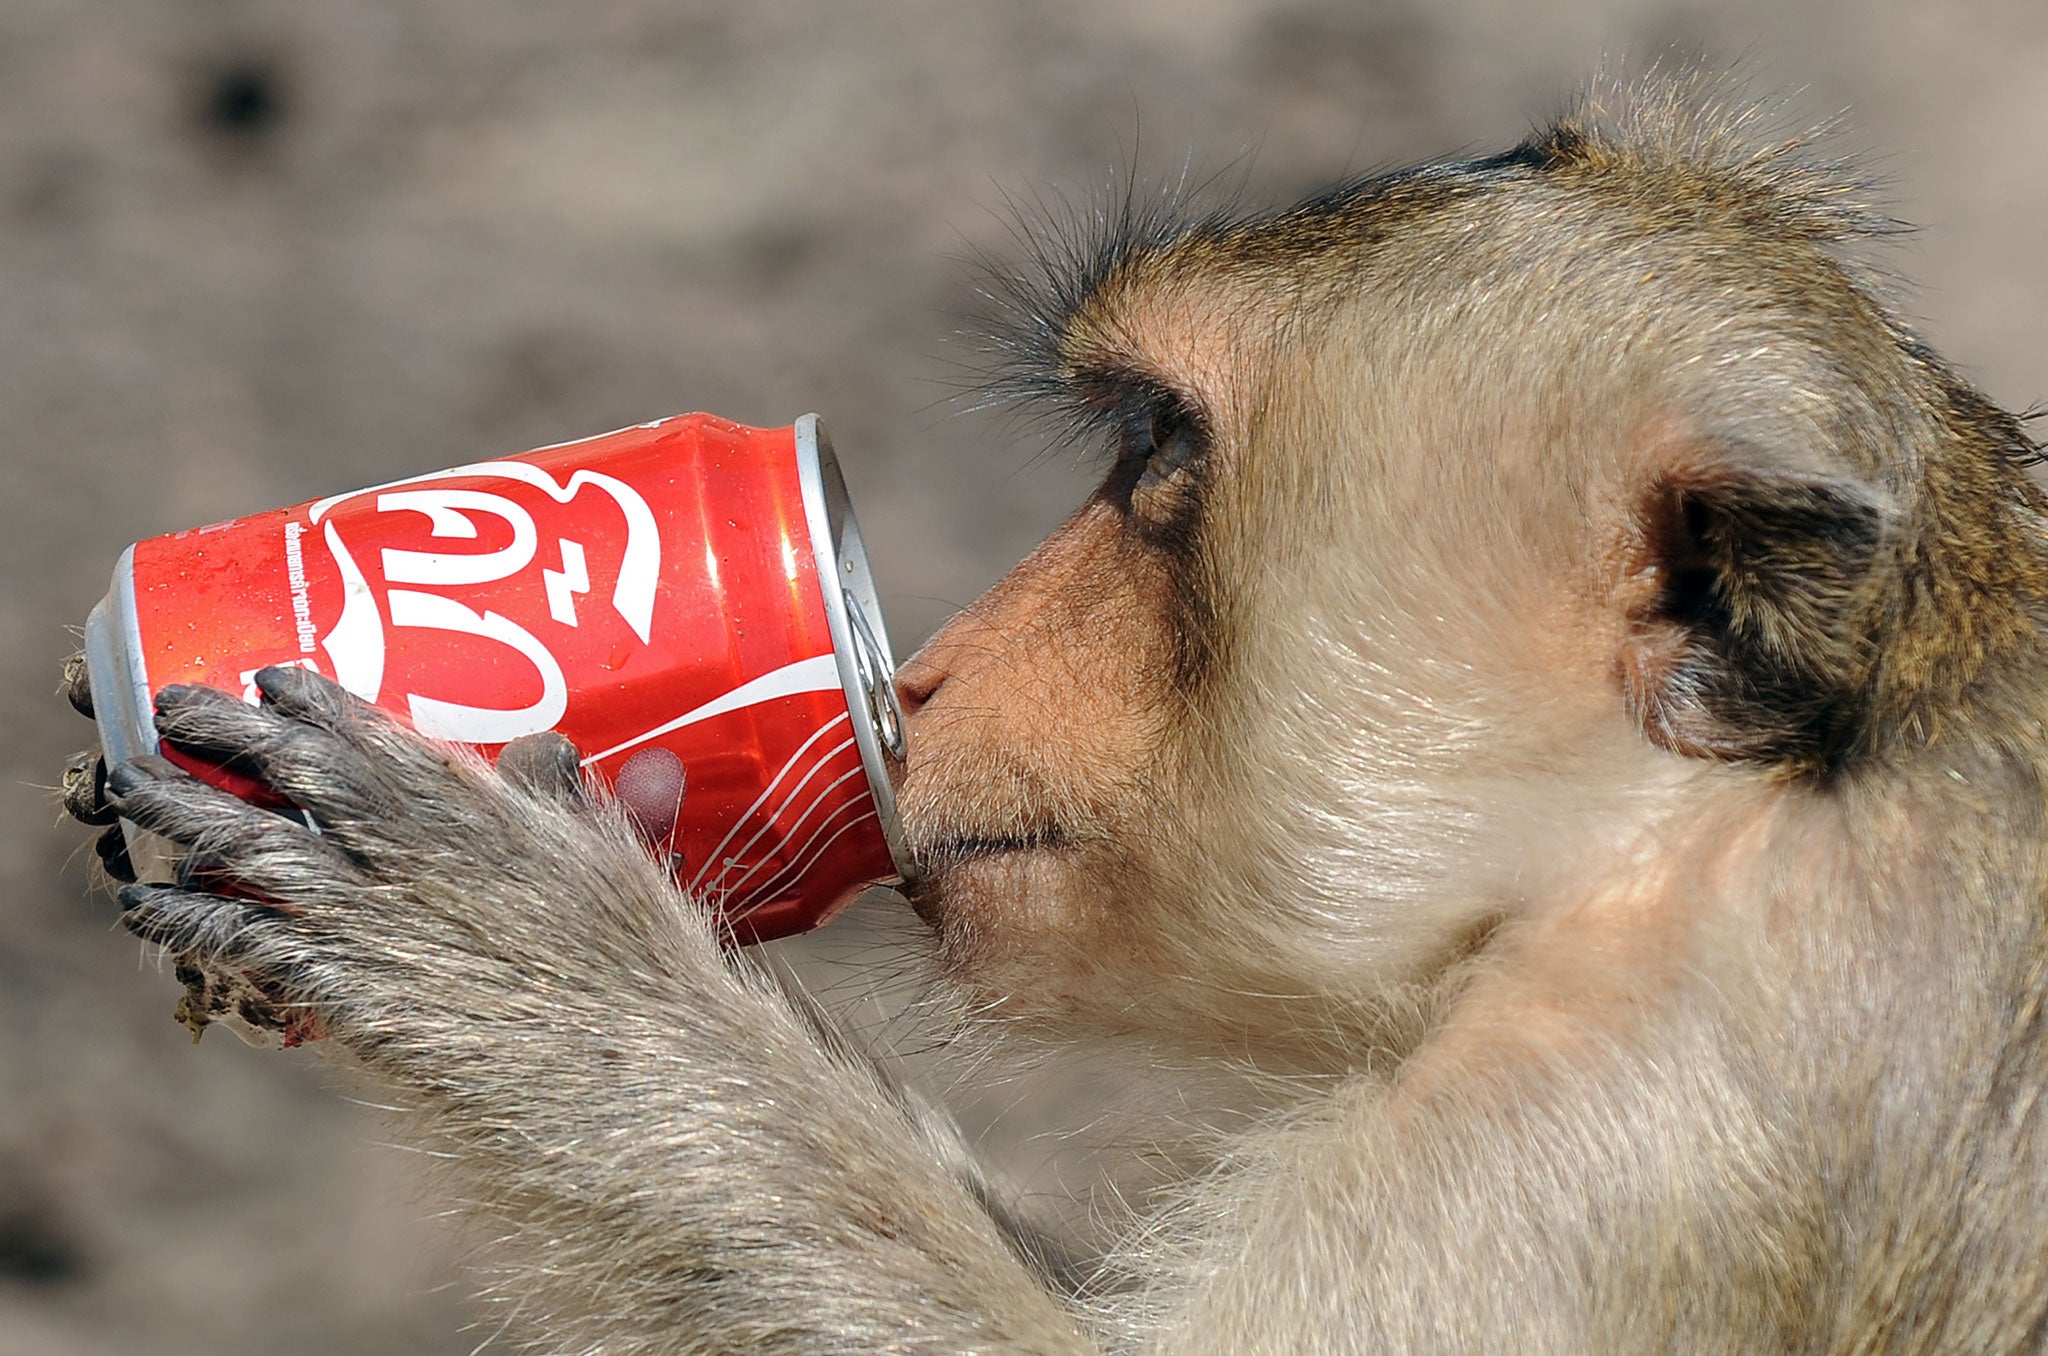 A monkey has a drink from a can at an ancient temple in Lopburi province, some 150 kms north of Bangkok on November 29, 2009 during the annual 'monkey buffet'.